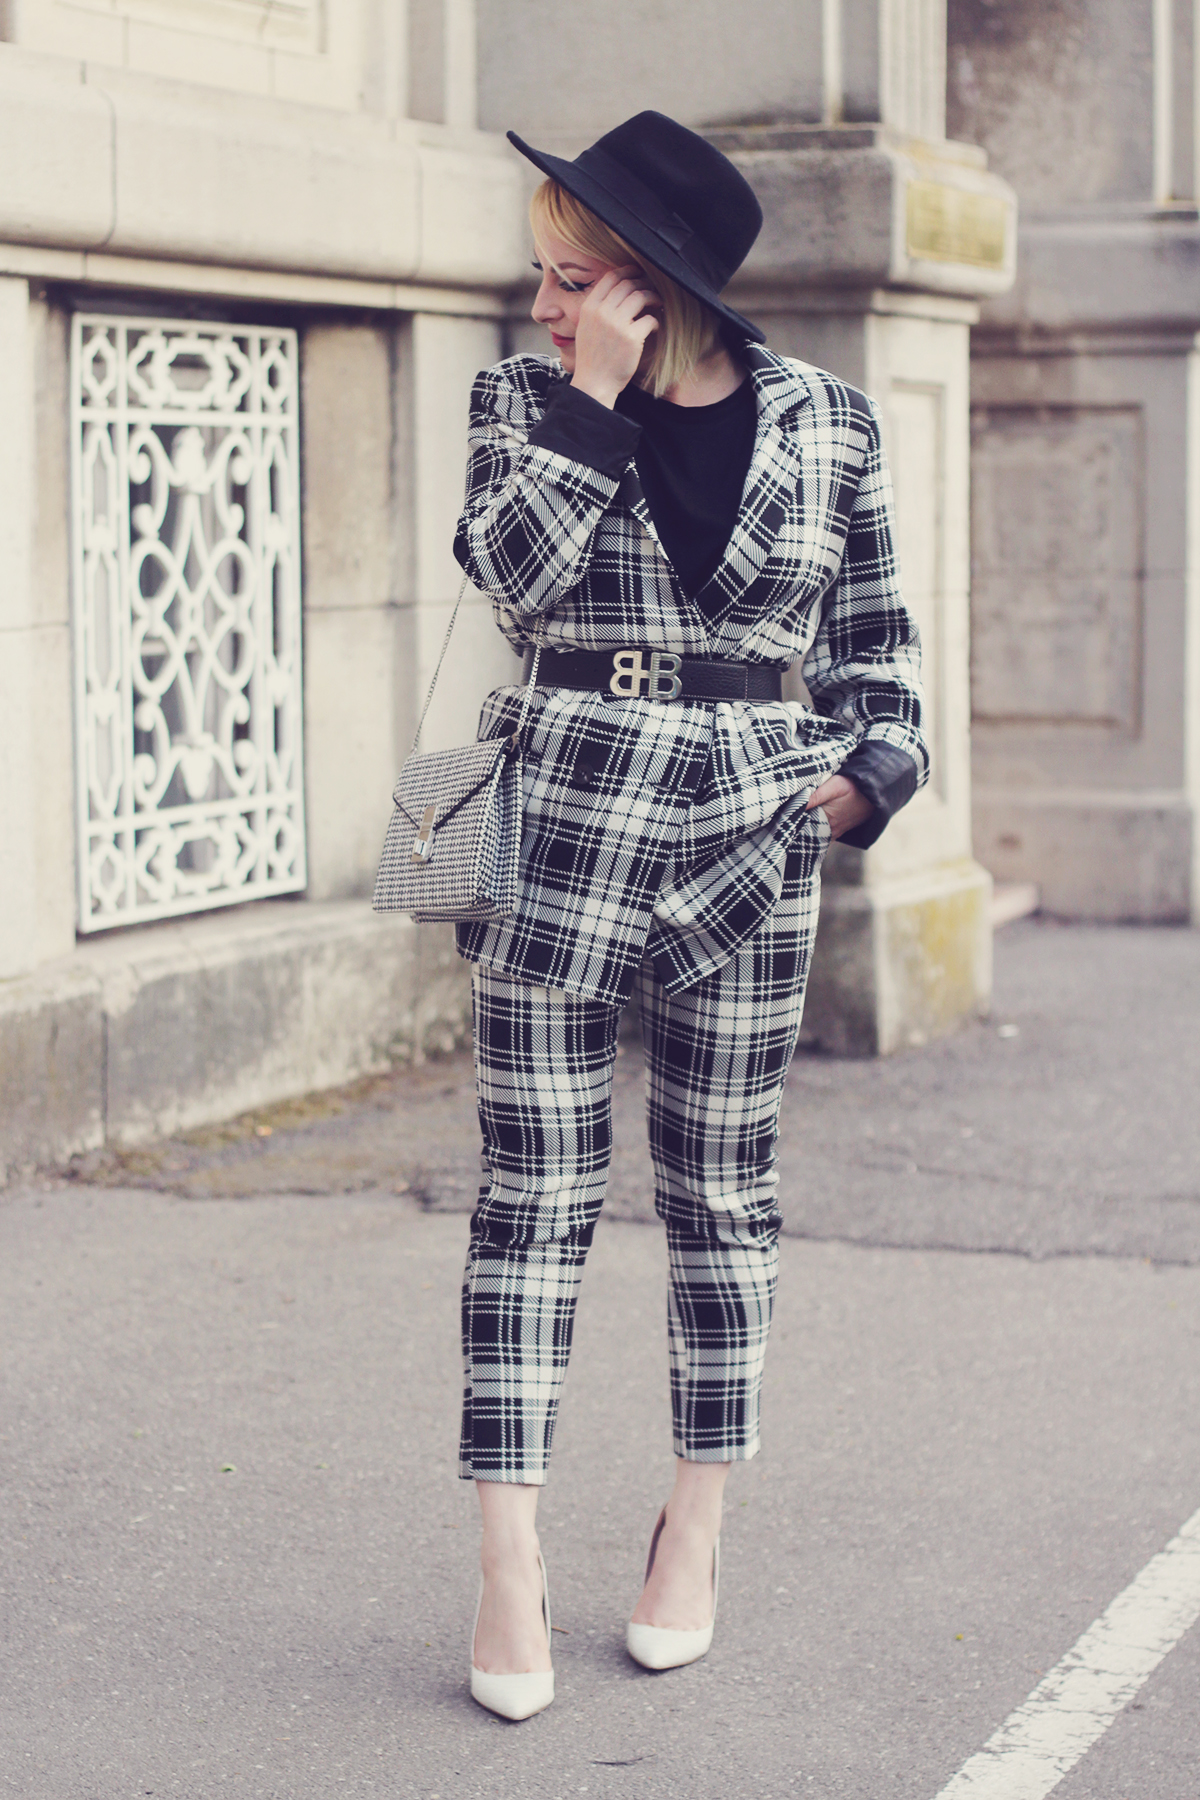 black and white look, office look, Womanfashion.ro checked suit, Hugo Boss belt, fedora hat, white heels, houndstooth Dune London bag, spring, spring fashion